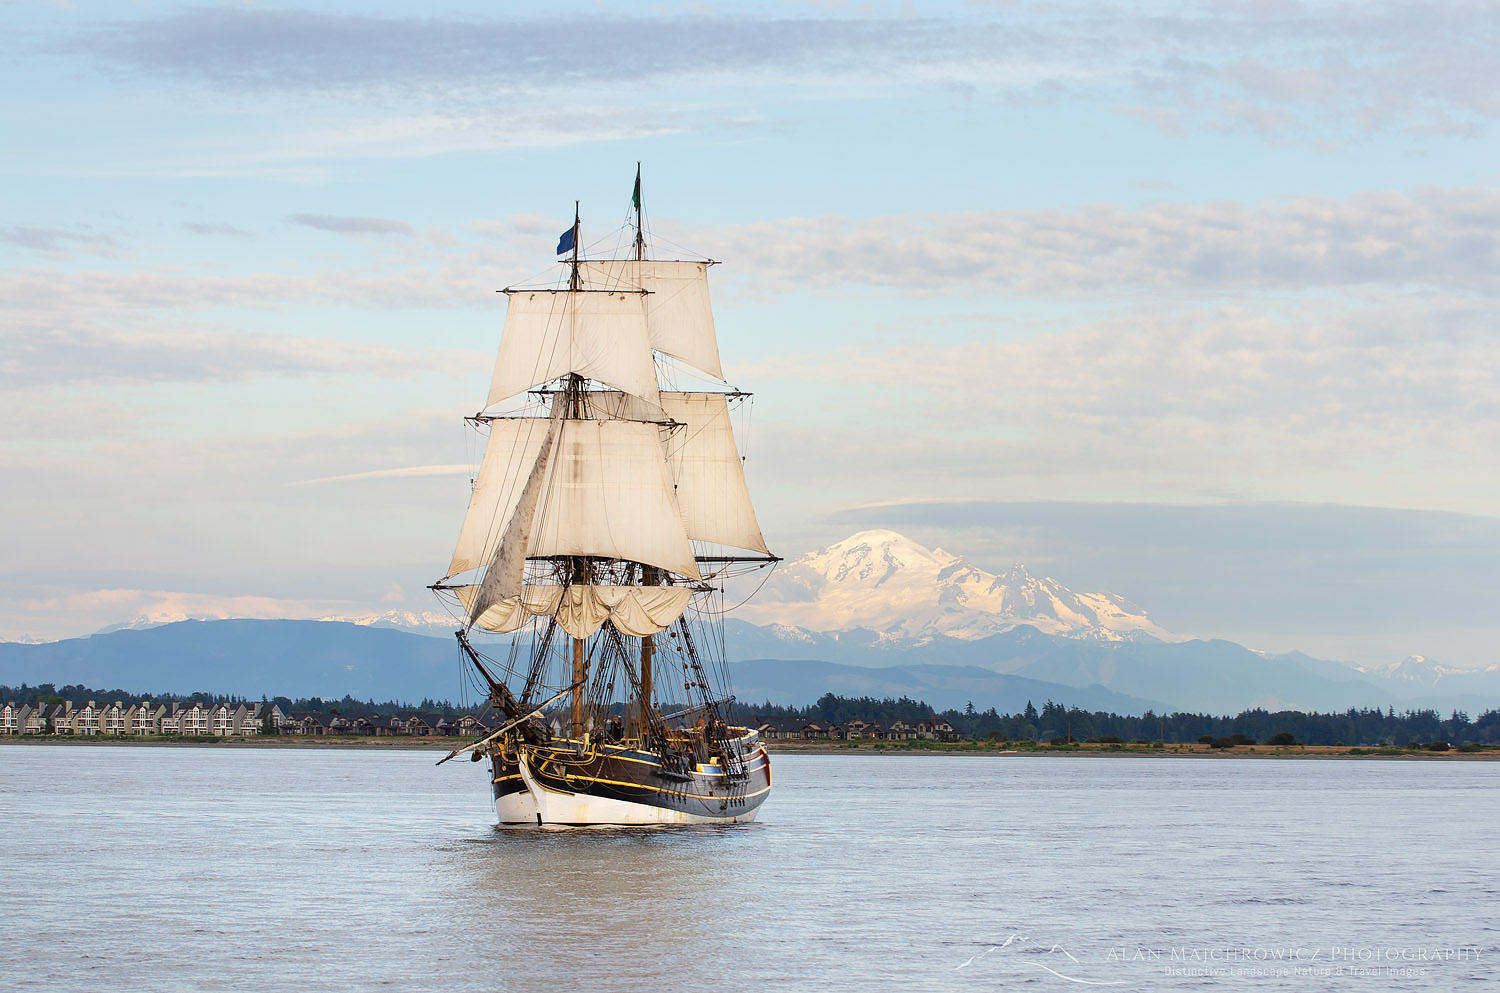 Lady Washington at sail in Semiahmoo Bay, Washington. Mount Baker is in the distance. A historic replica of the original 18th Century brig. Owned and operated by the Grays Harbor Historical Seaport, Aberdeen, Washington #62509